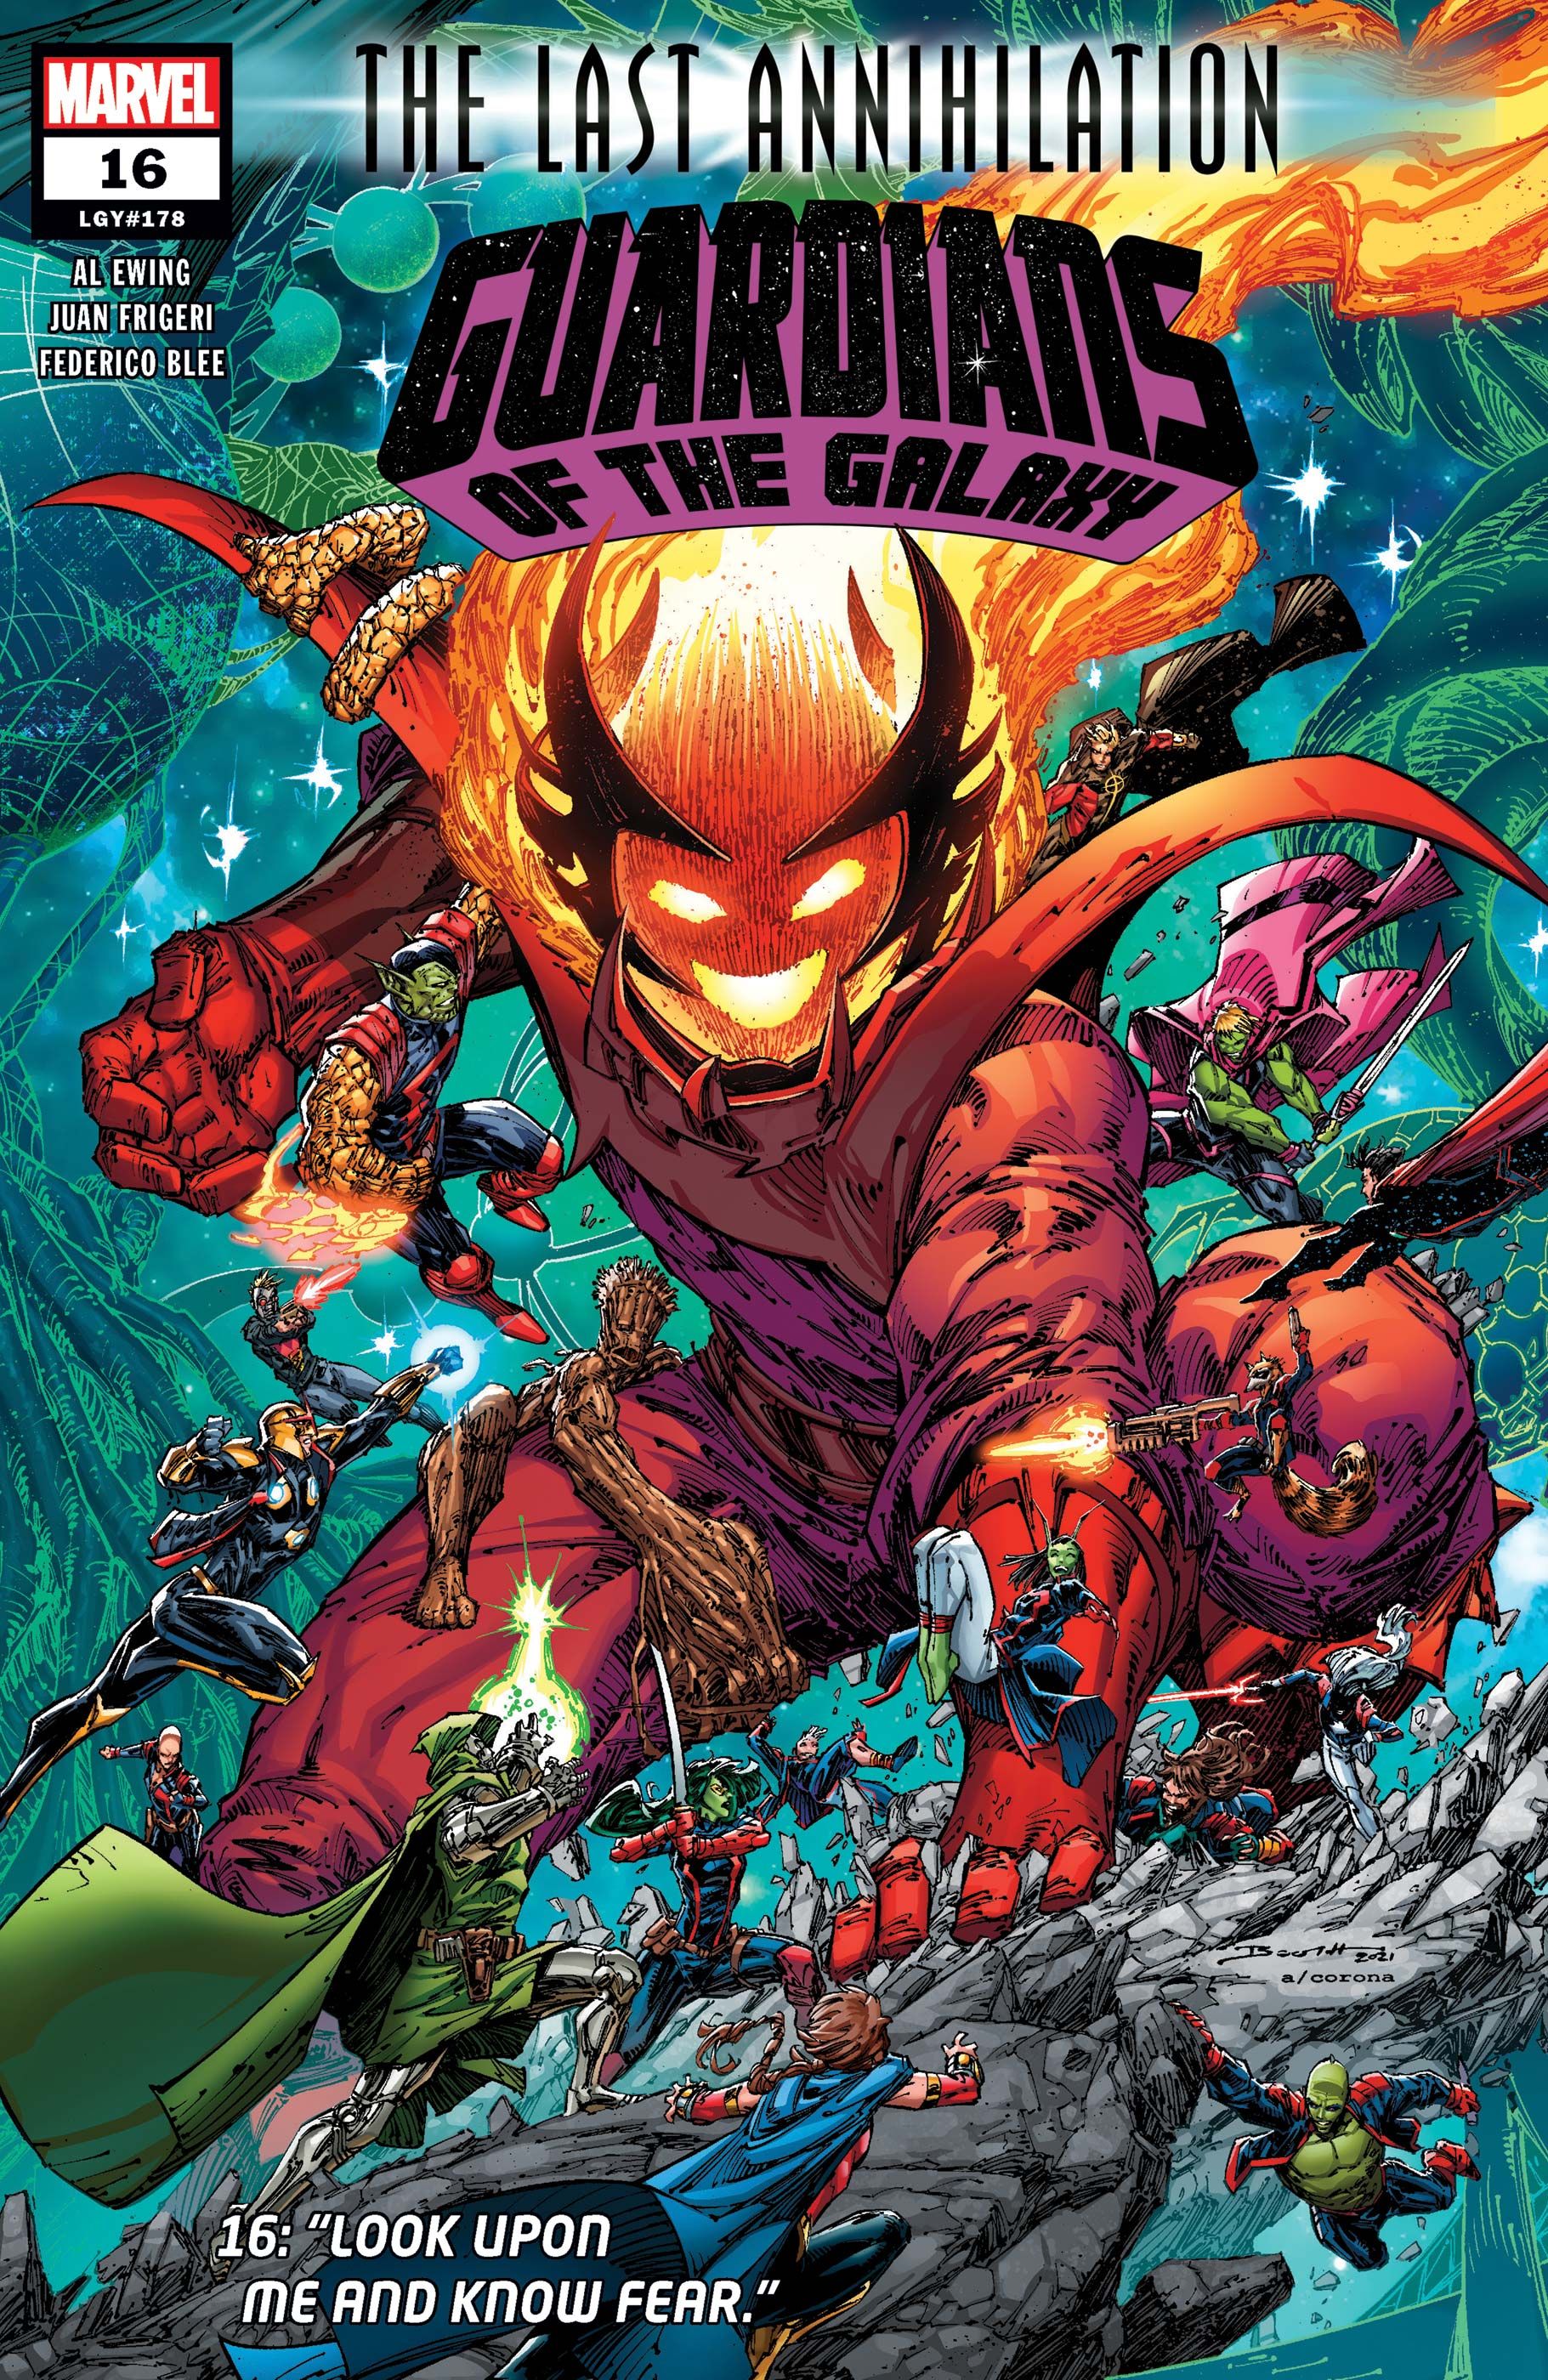 Dormammu attacks the Guardians of the Galaxy